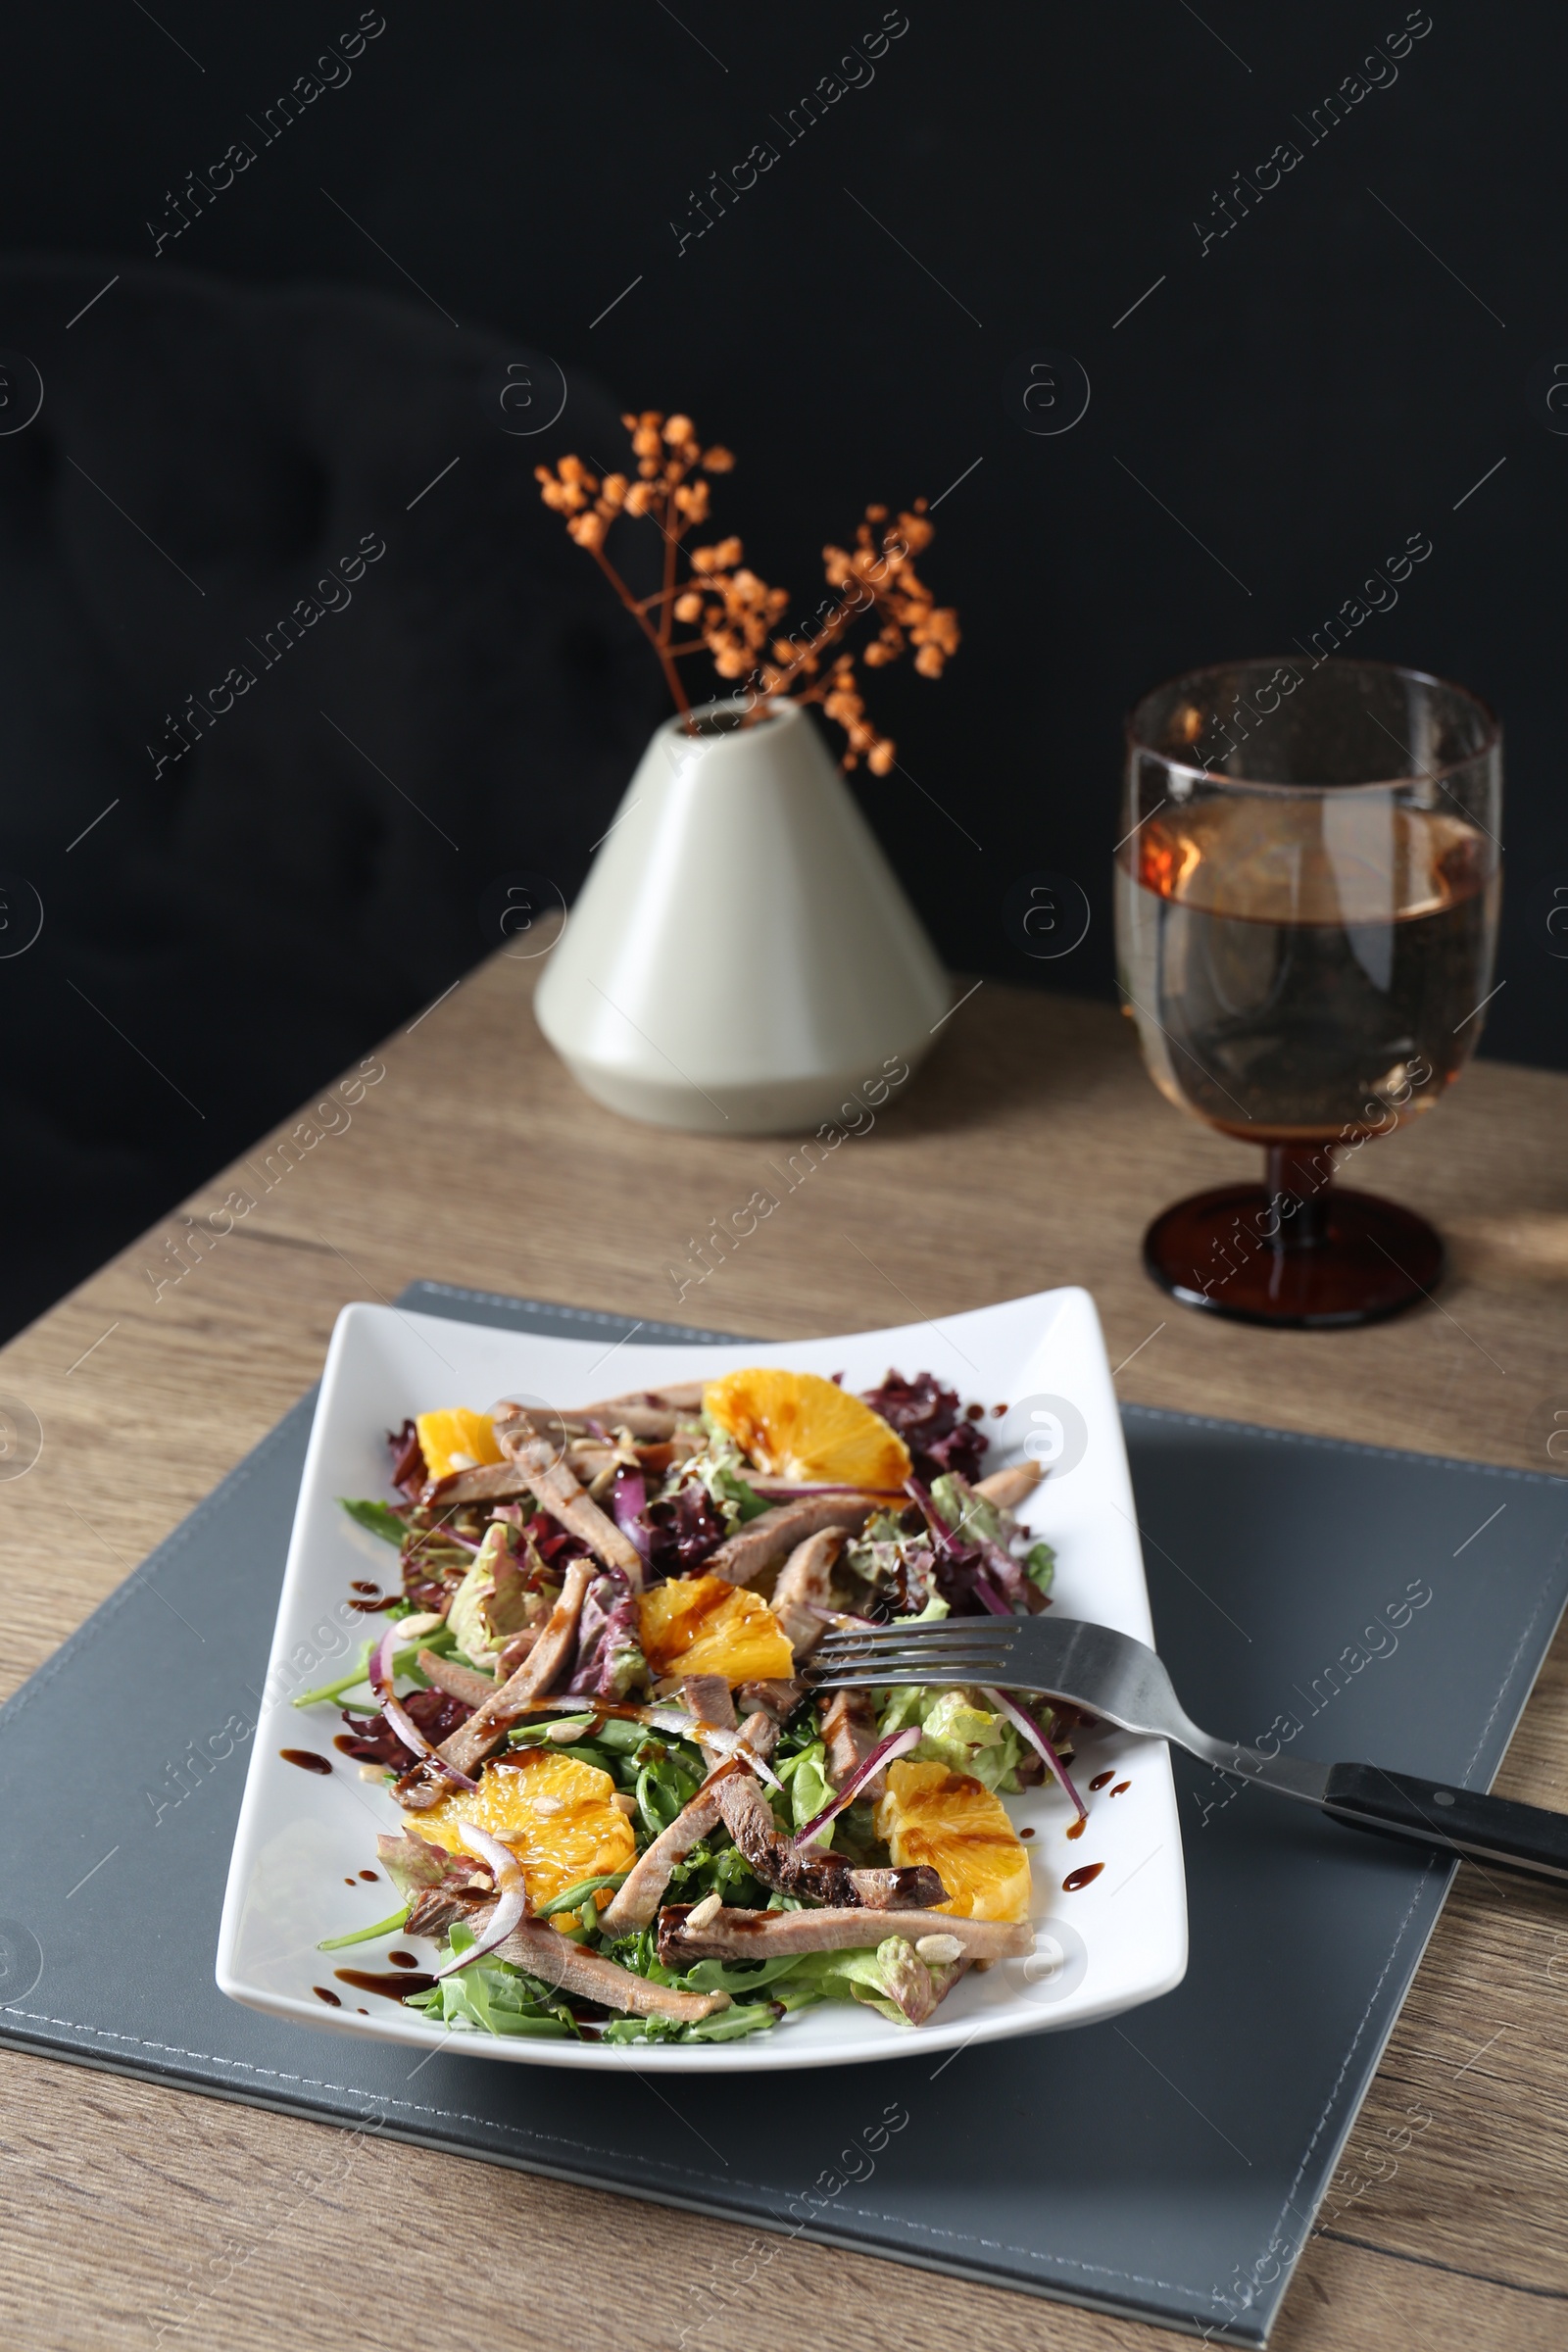 Photo of Delicious salad with beef tongue, orange, onion and fork served on wooden table